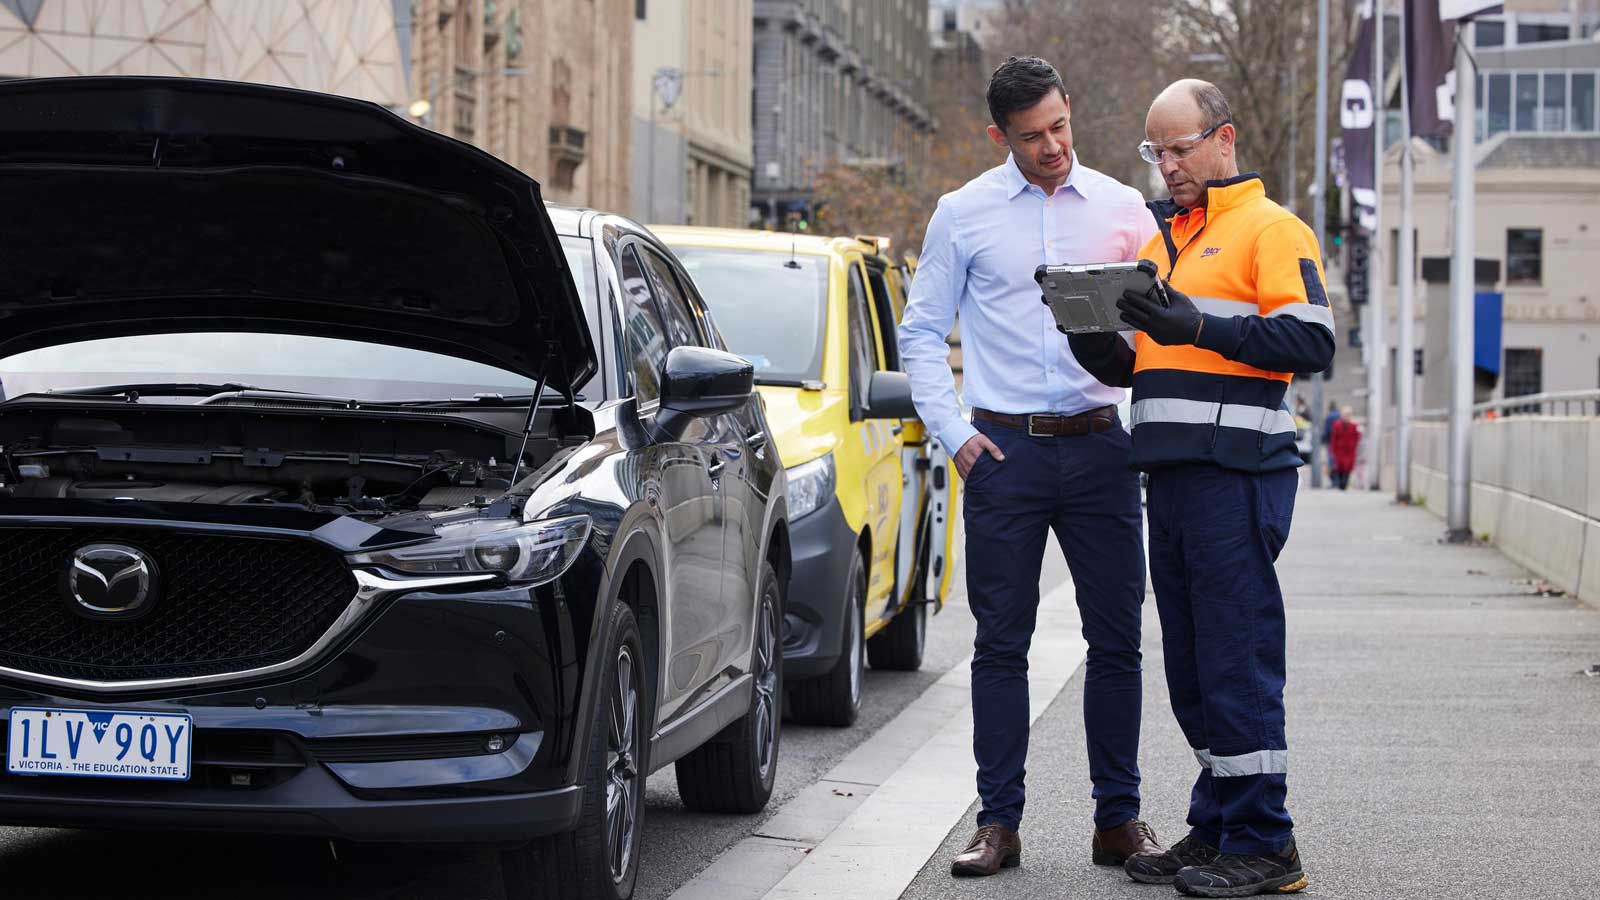 RACV roadside assistance technician speaking with a customer in Melbourne city.